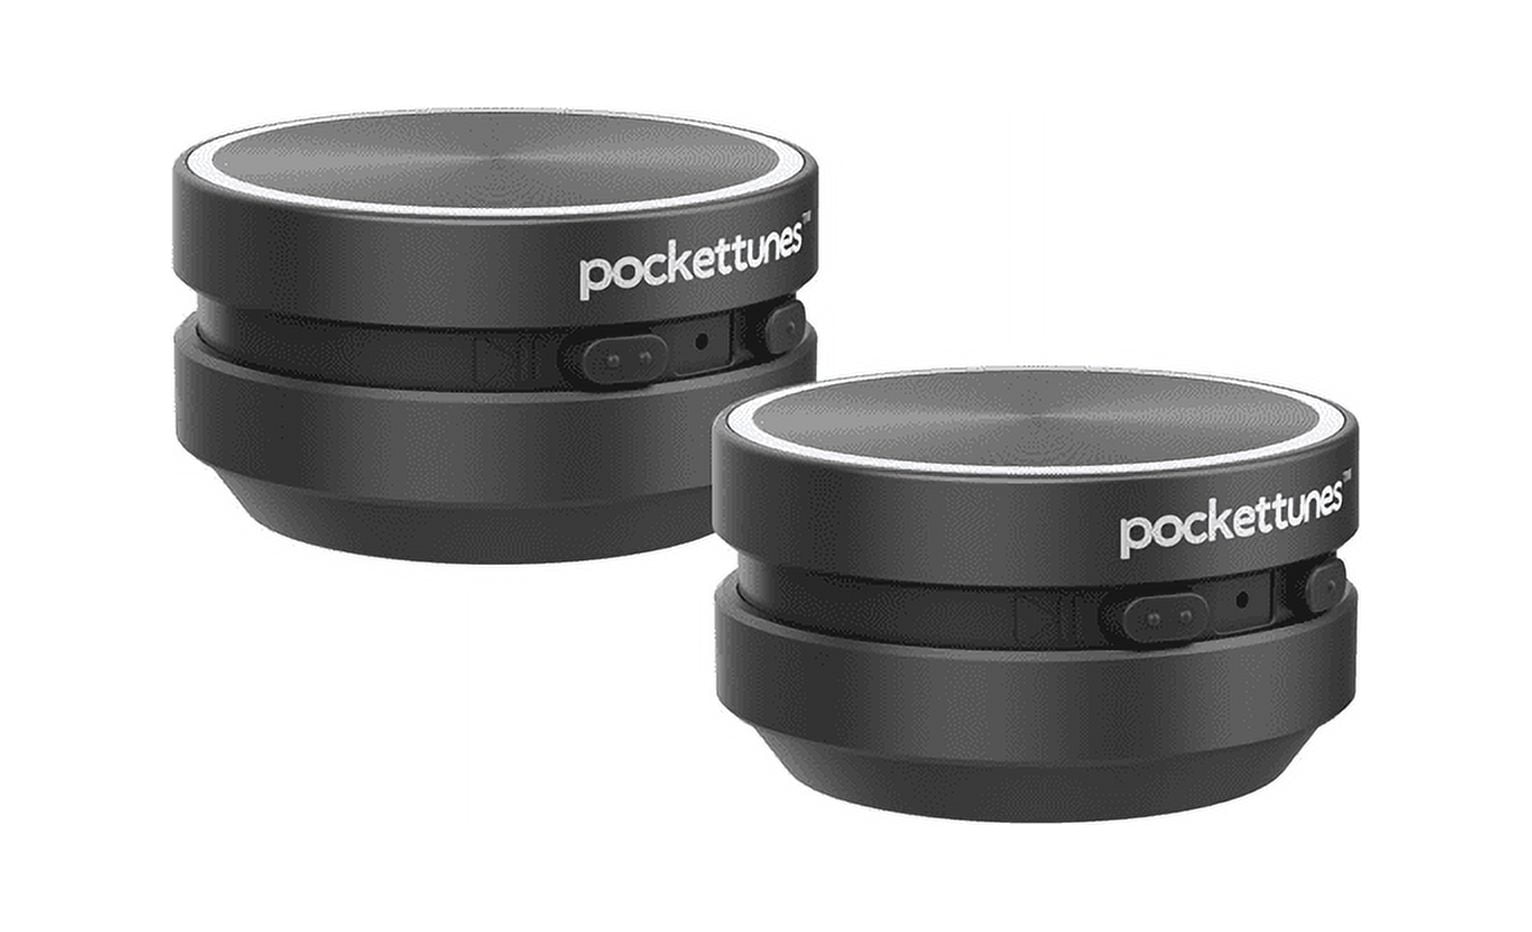 Pockettunes Bone Conduction Instant Mini Speakers with Bluetooth Wireless Technology - Black - 2 Pack